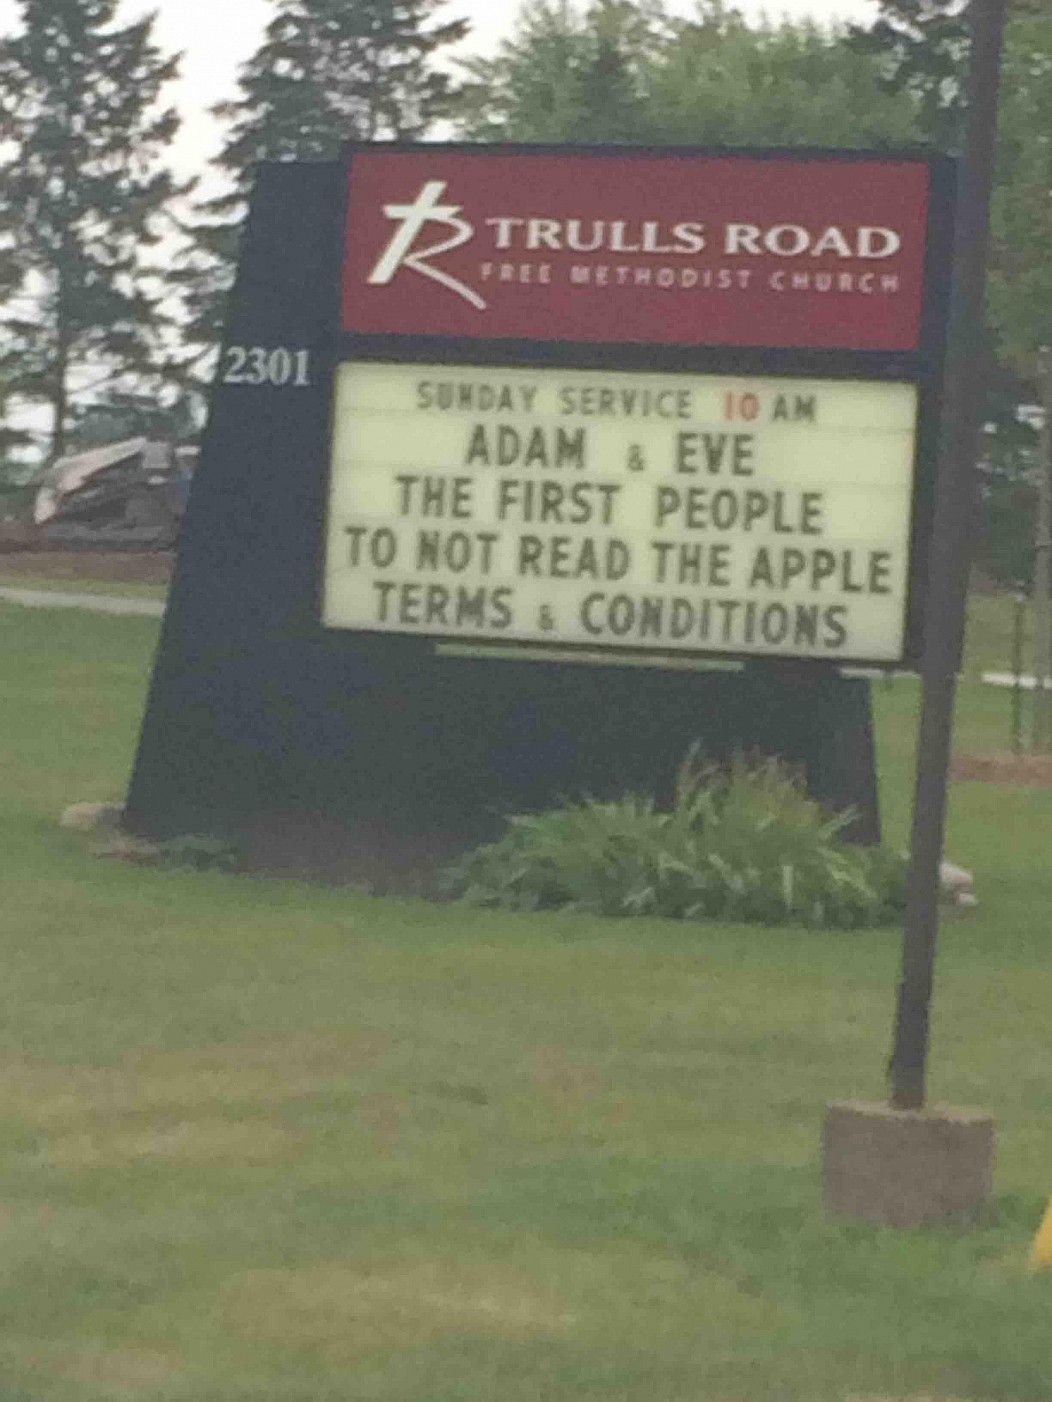 Trulls Road Free Methodist Church 22301 Sunday Service 10 Am Adam & Eve The First People To Not Read The Apple Terms & Conditions